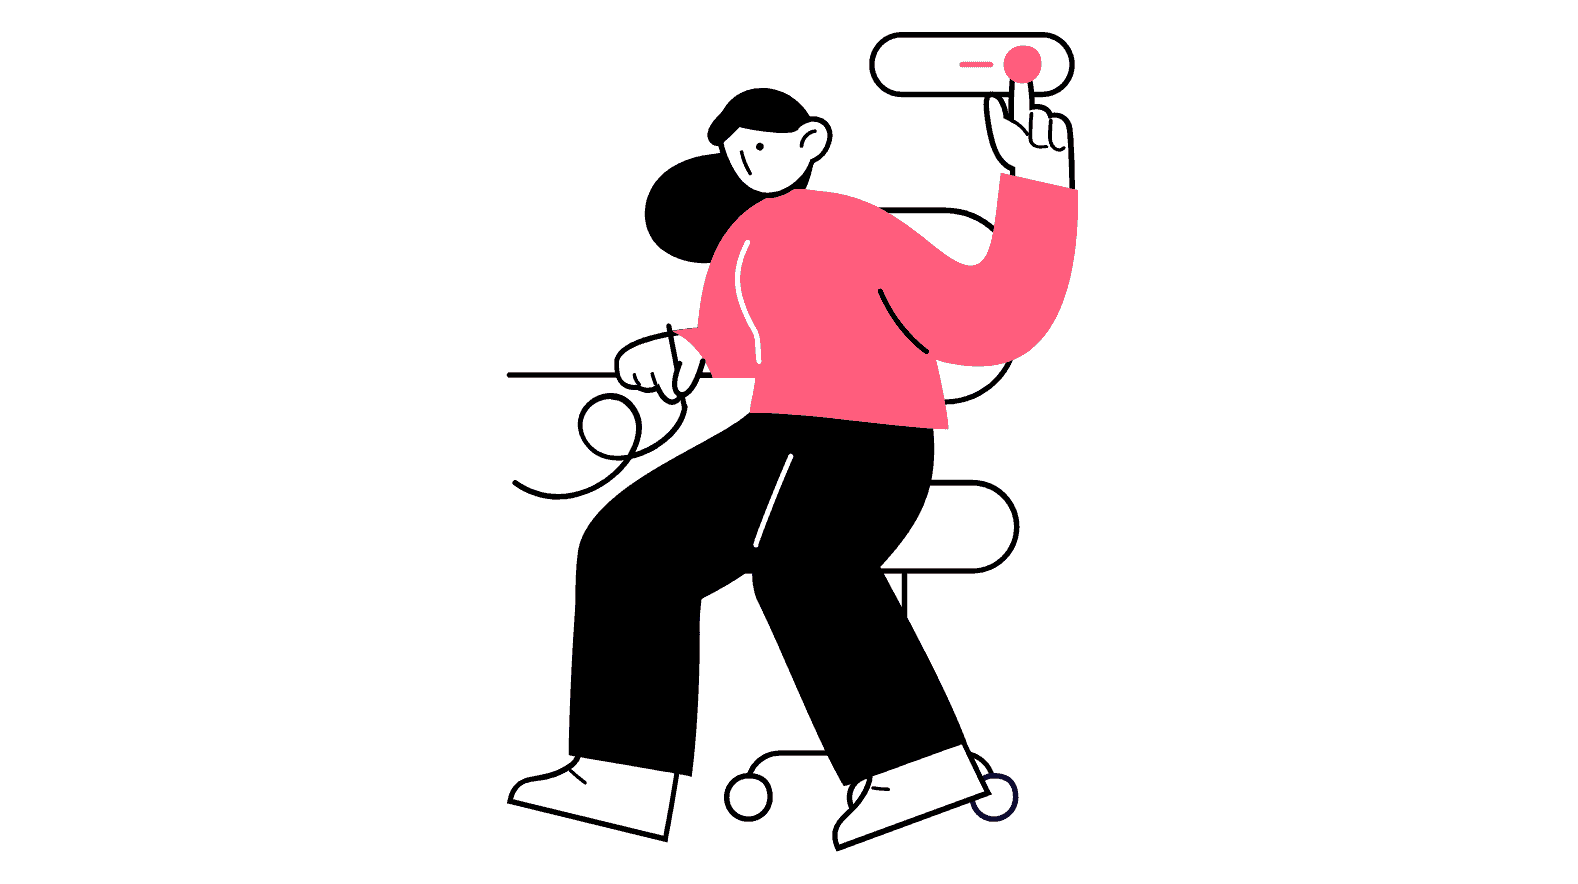 illustration of a lady designing Accessibility guidelines for User Experience Designers